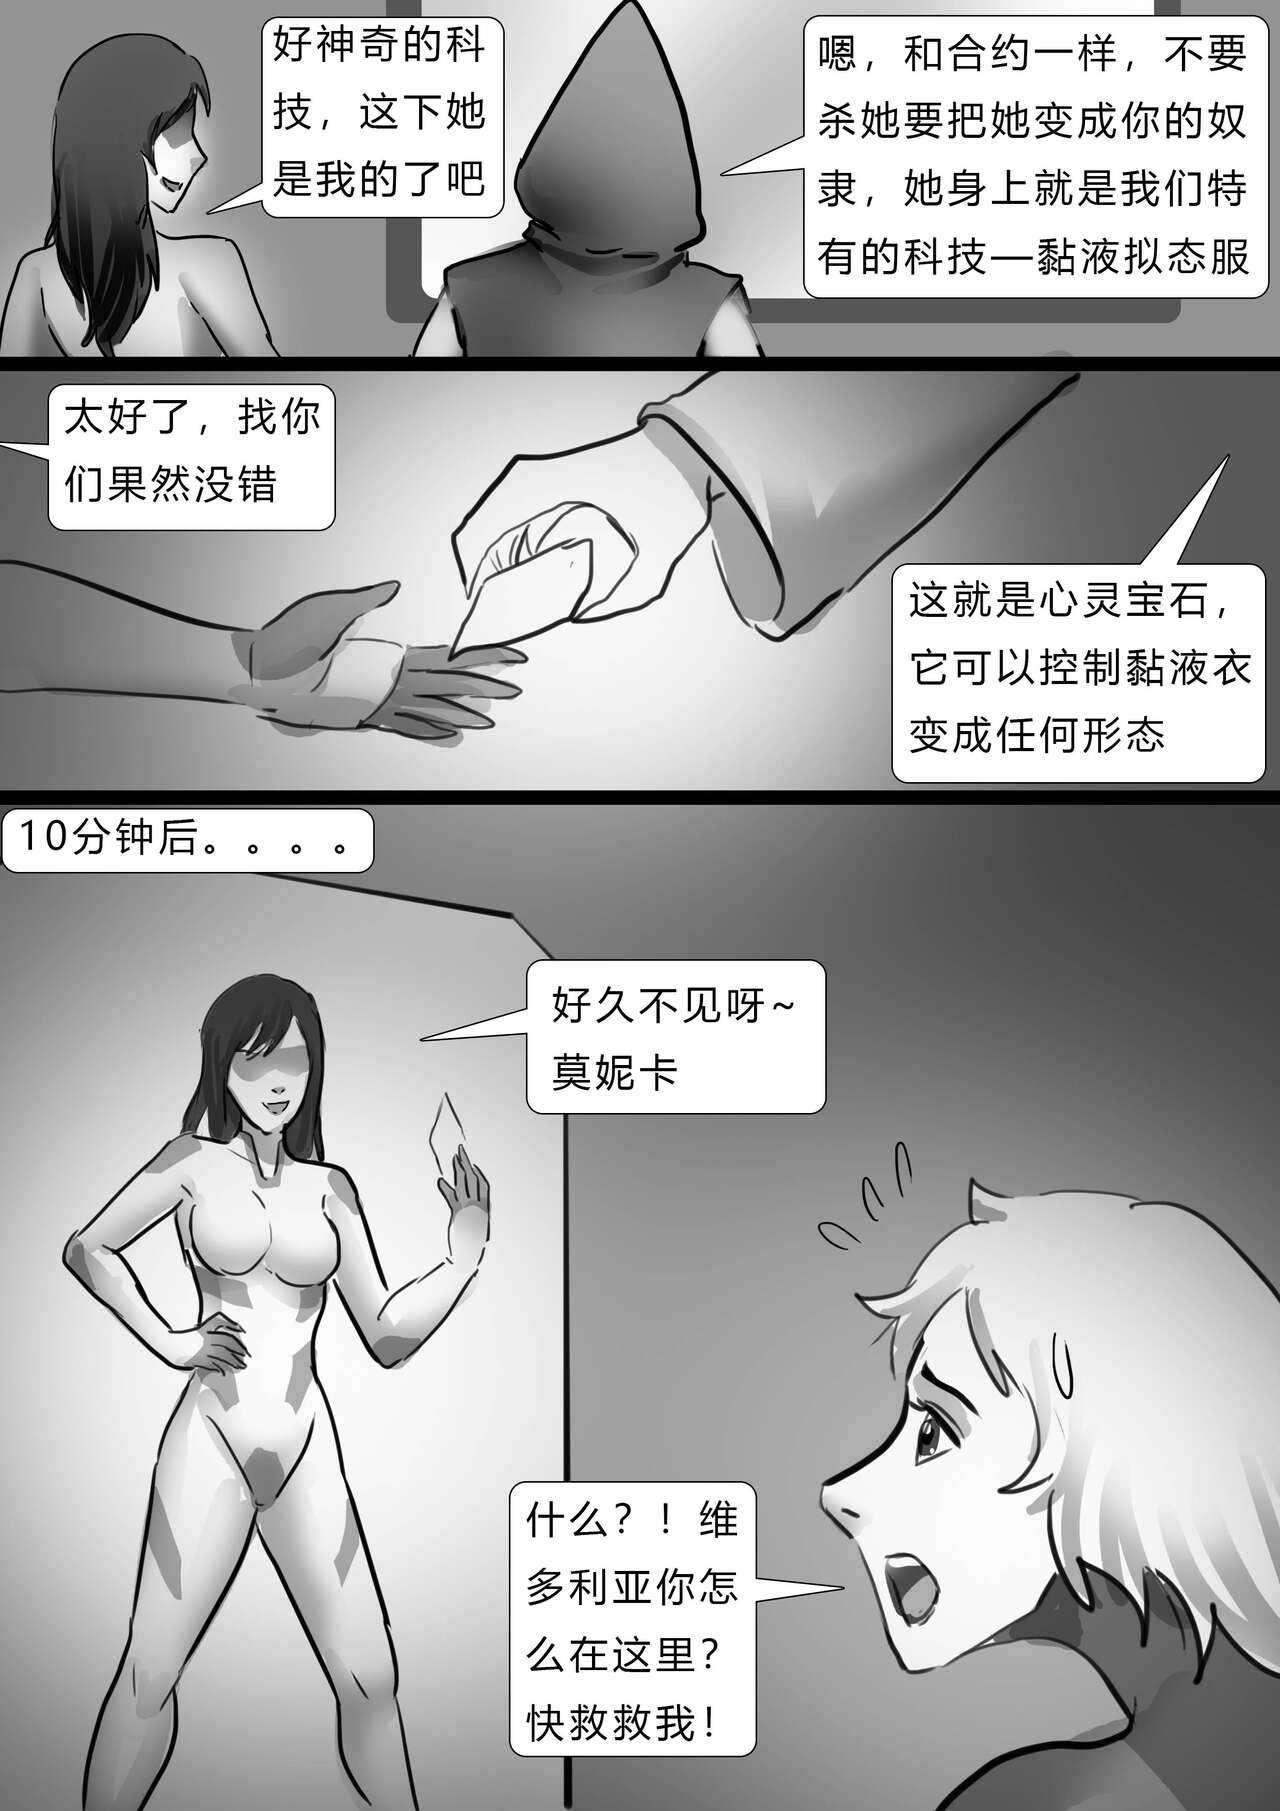 Style 千变女奴 Thousand-change slave girl Audition - Page 9